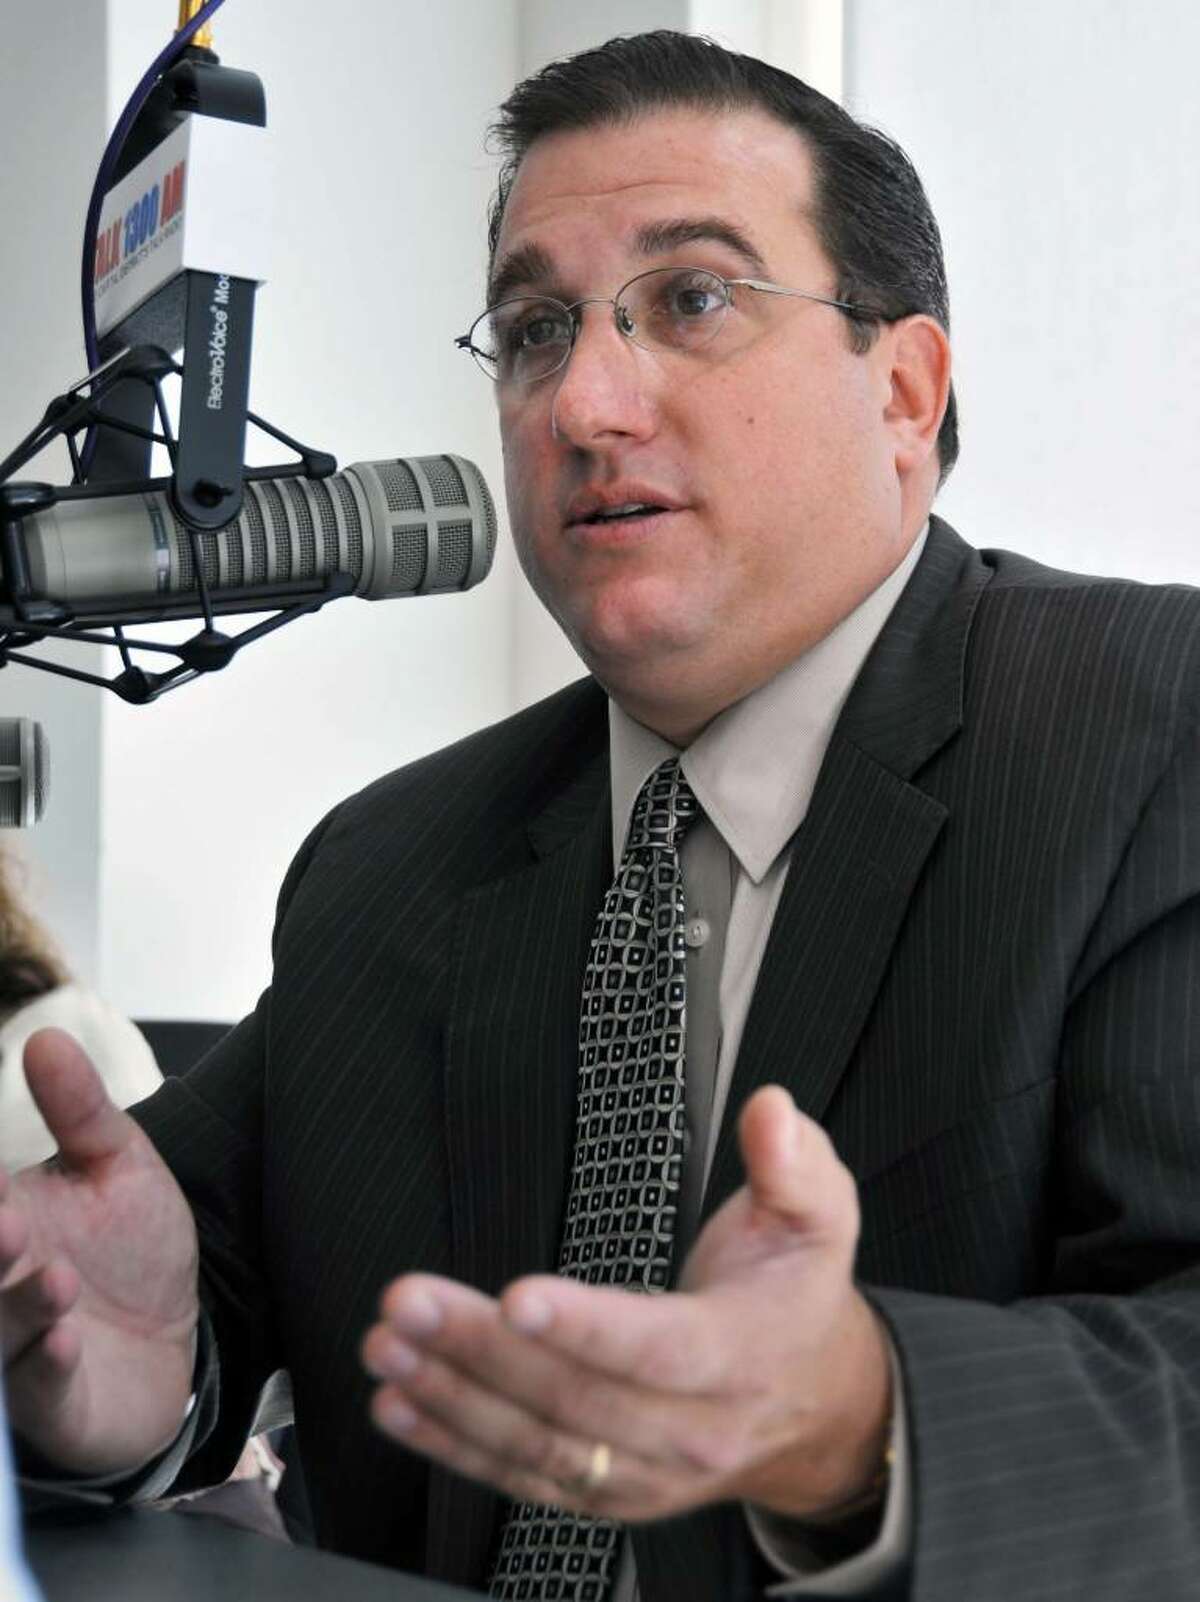 Albany police union President Christian Mesley in the studio of 1300 AM in September 2009. Mesley has filed a lawsuit claiming he suffered "public hatred" and stress from comments made by District Attorney David Soares. (John Carl D'Annibale / Times Union)